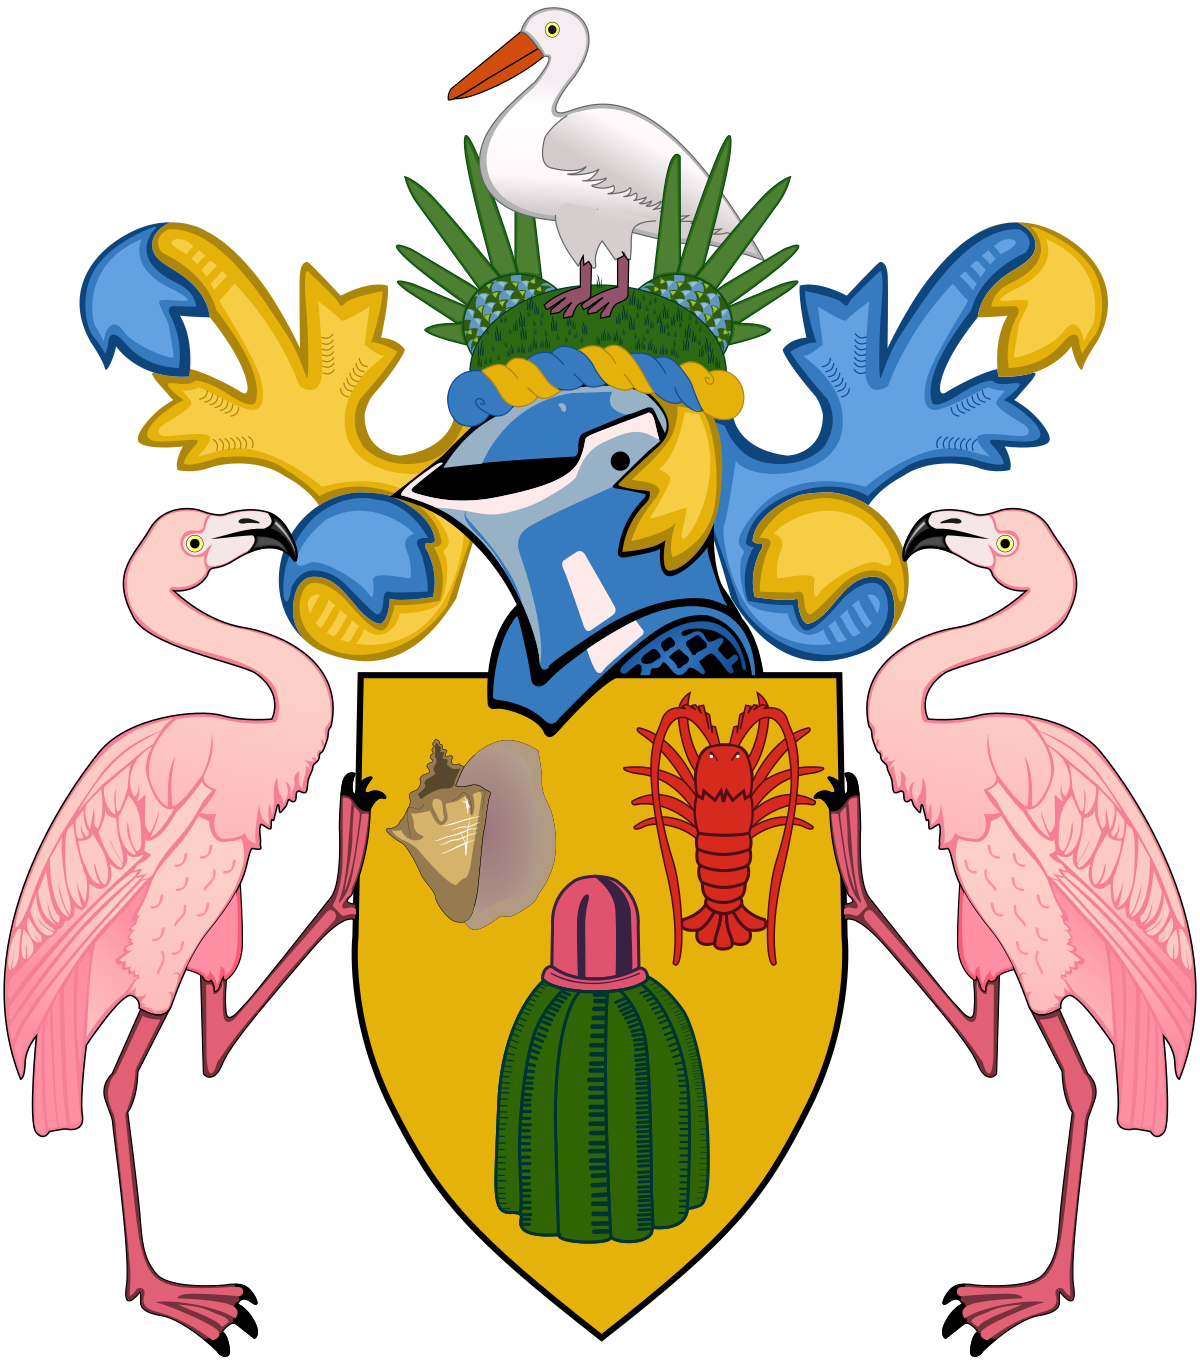 Turks and Caicos Islands Coat of Arms